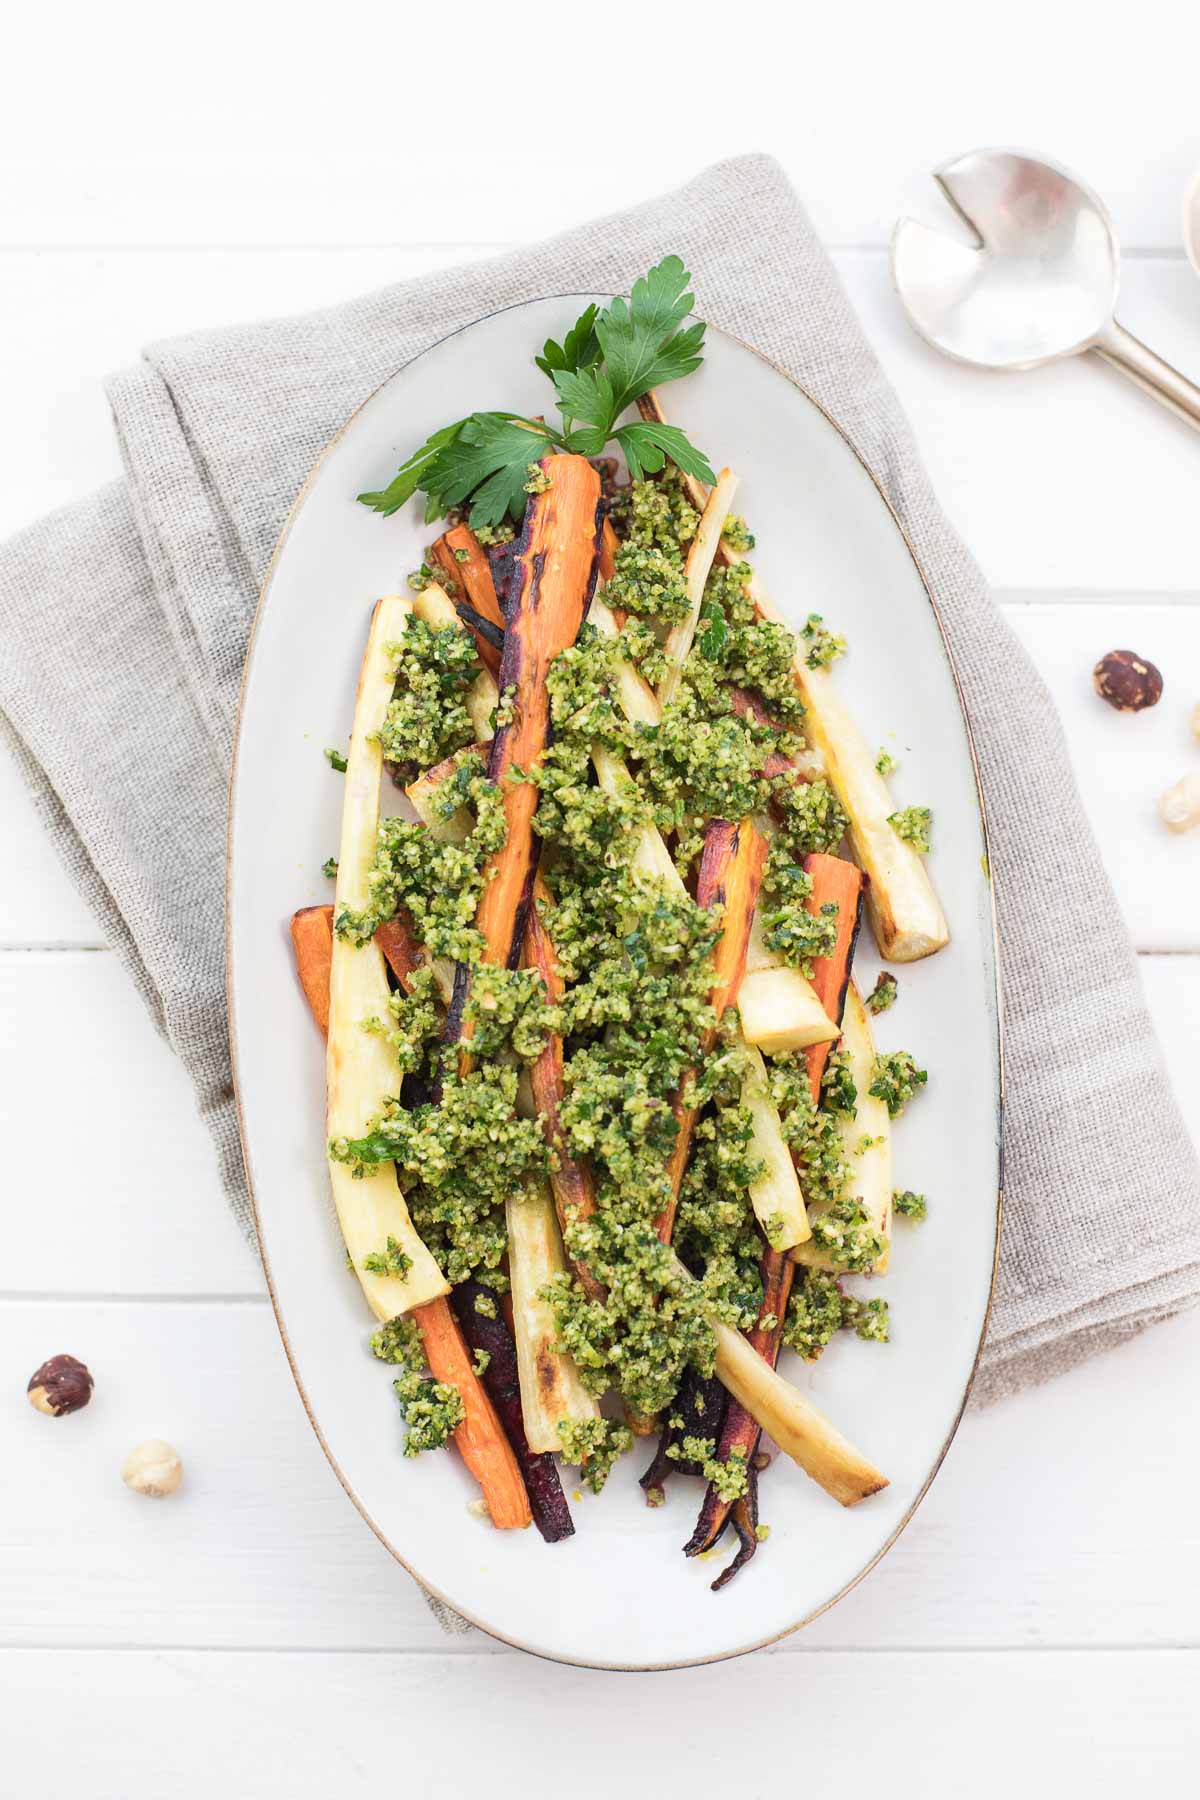 Oven-Roasted Parsnips and Carrots with Hazelnut Gremolata